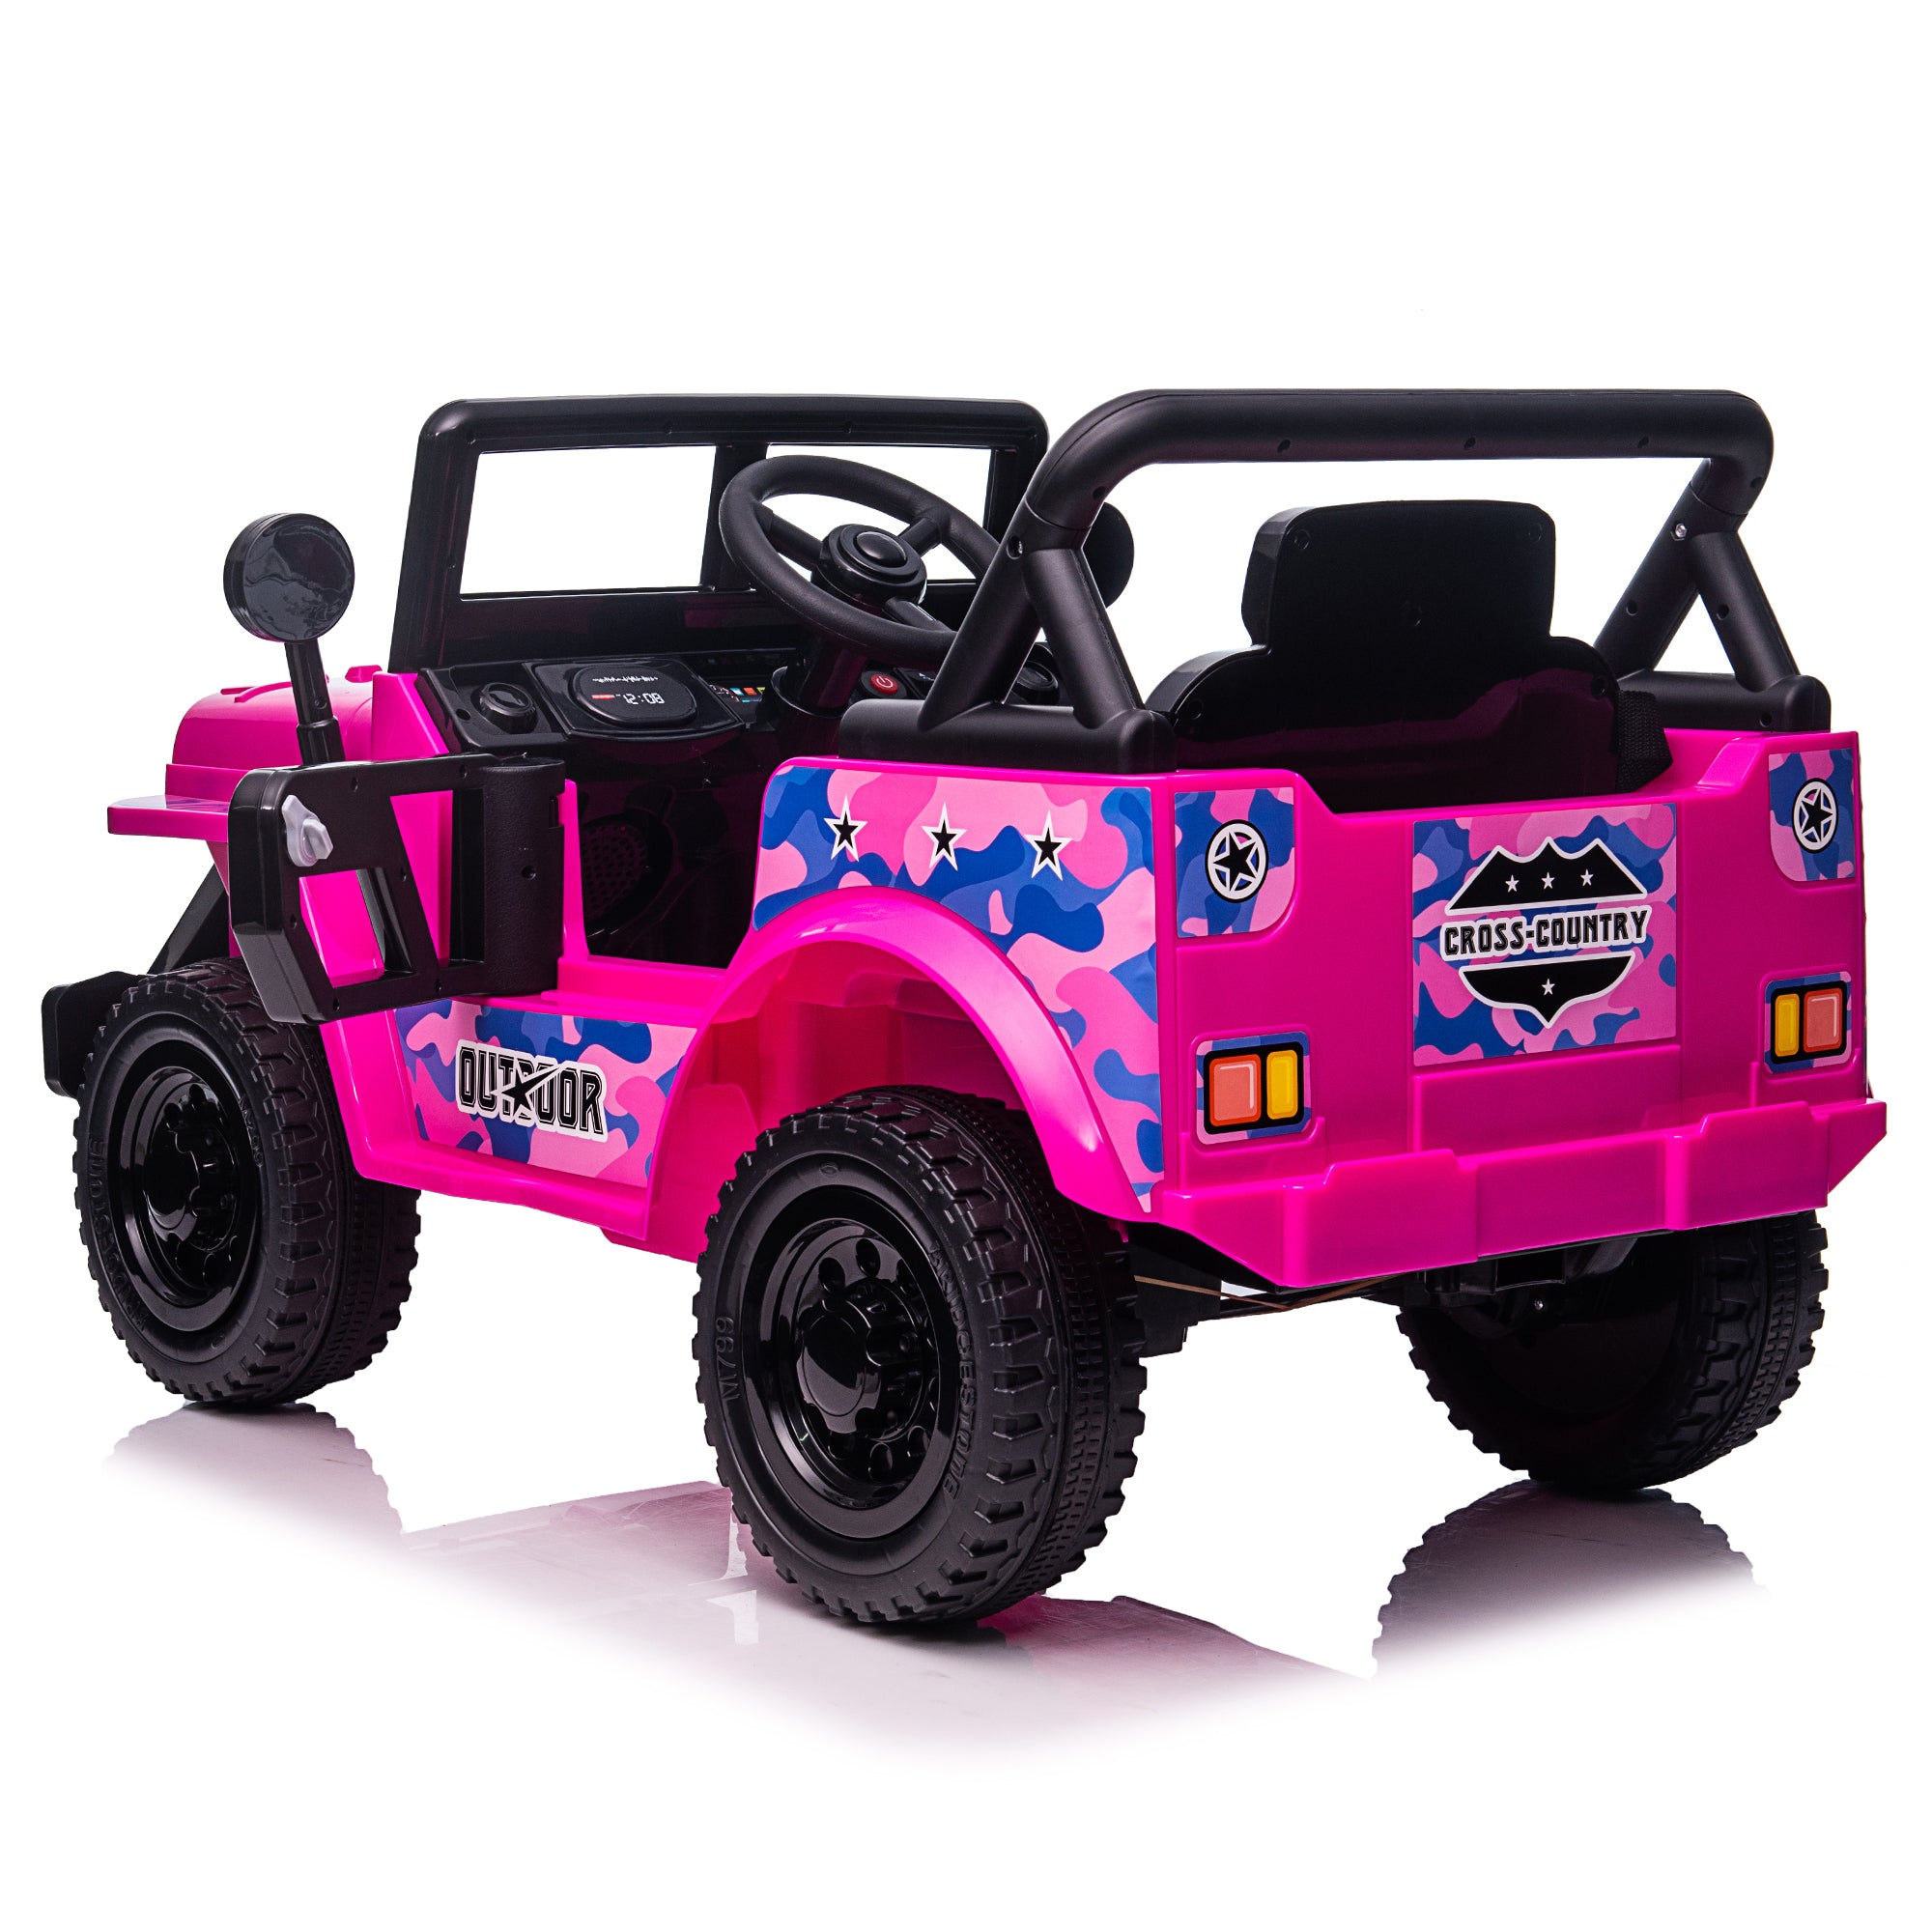 12V Kids Ride On Truck Car, Power Wheels with LED Lights Horn Openable Doors, Electric Vehicle Toy for 3-6 Ages - Pink